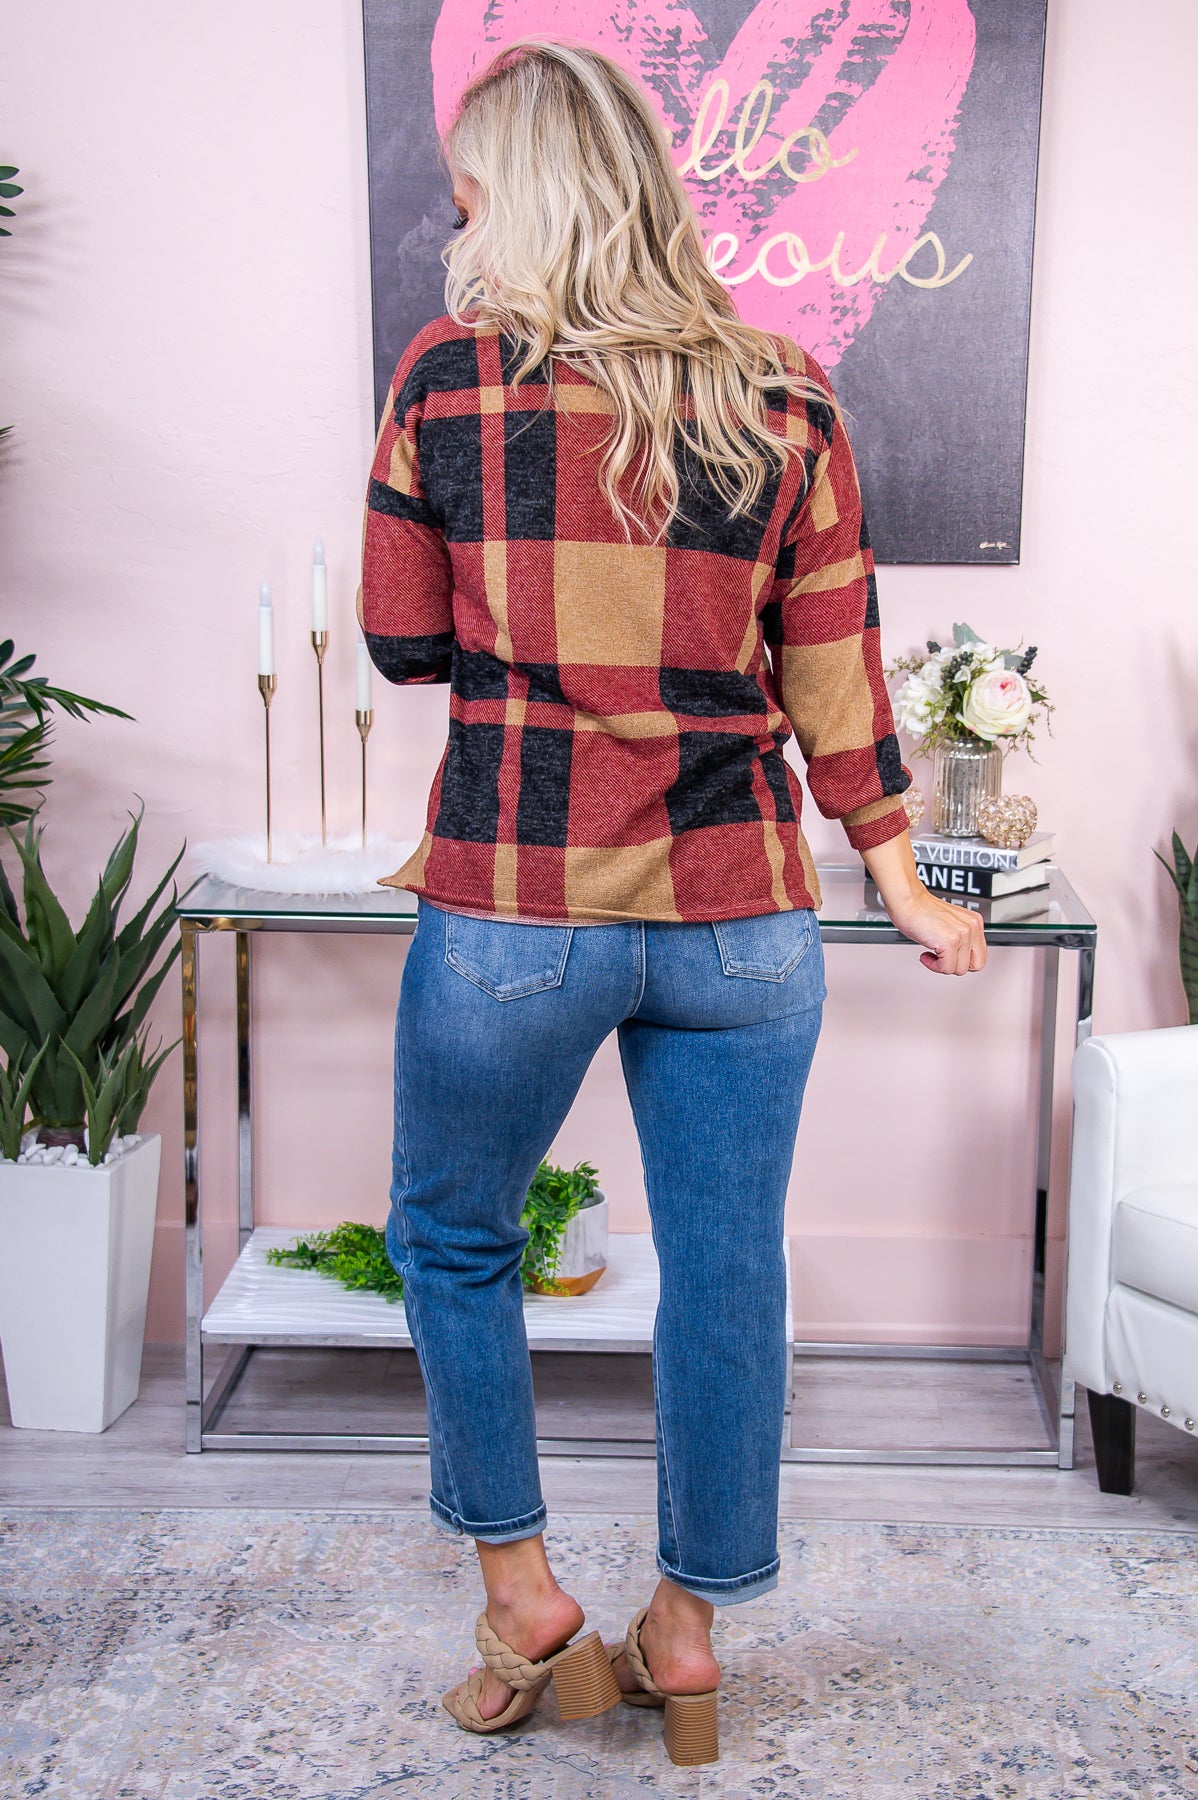 Fabulous Approach Taupe/Rust Plaid Top - T7877TA